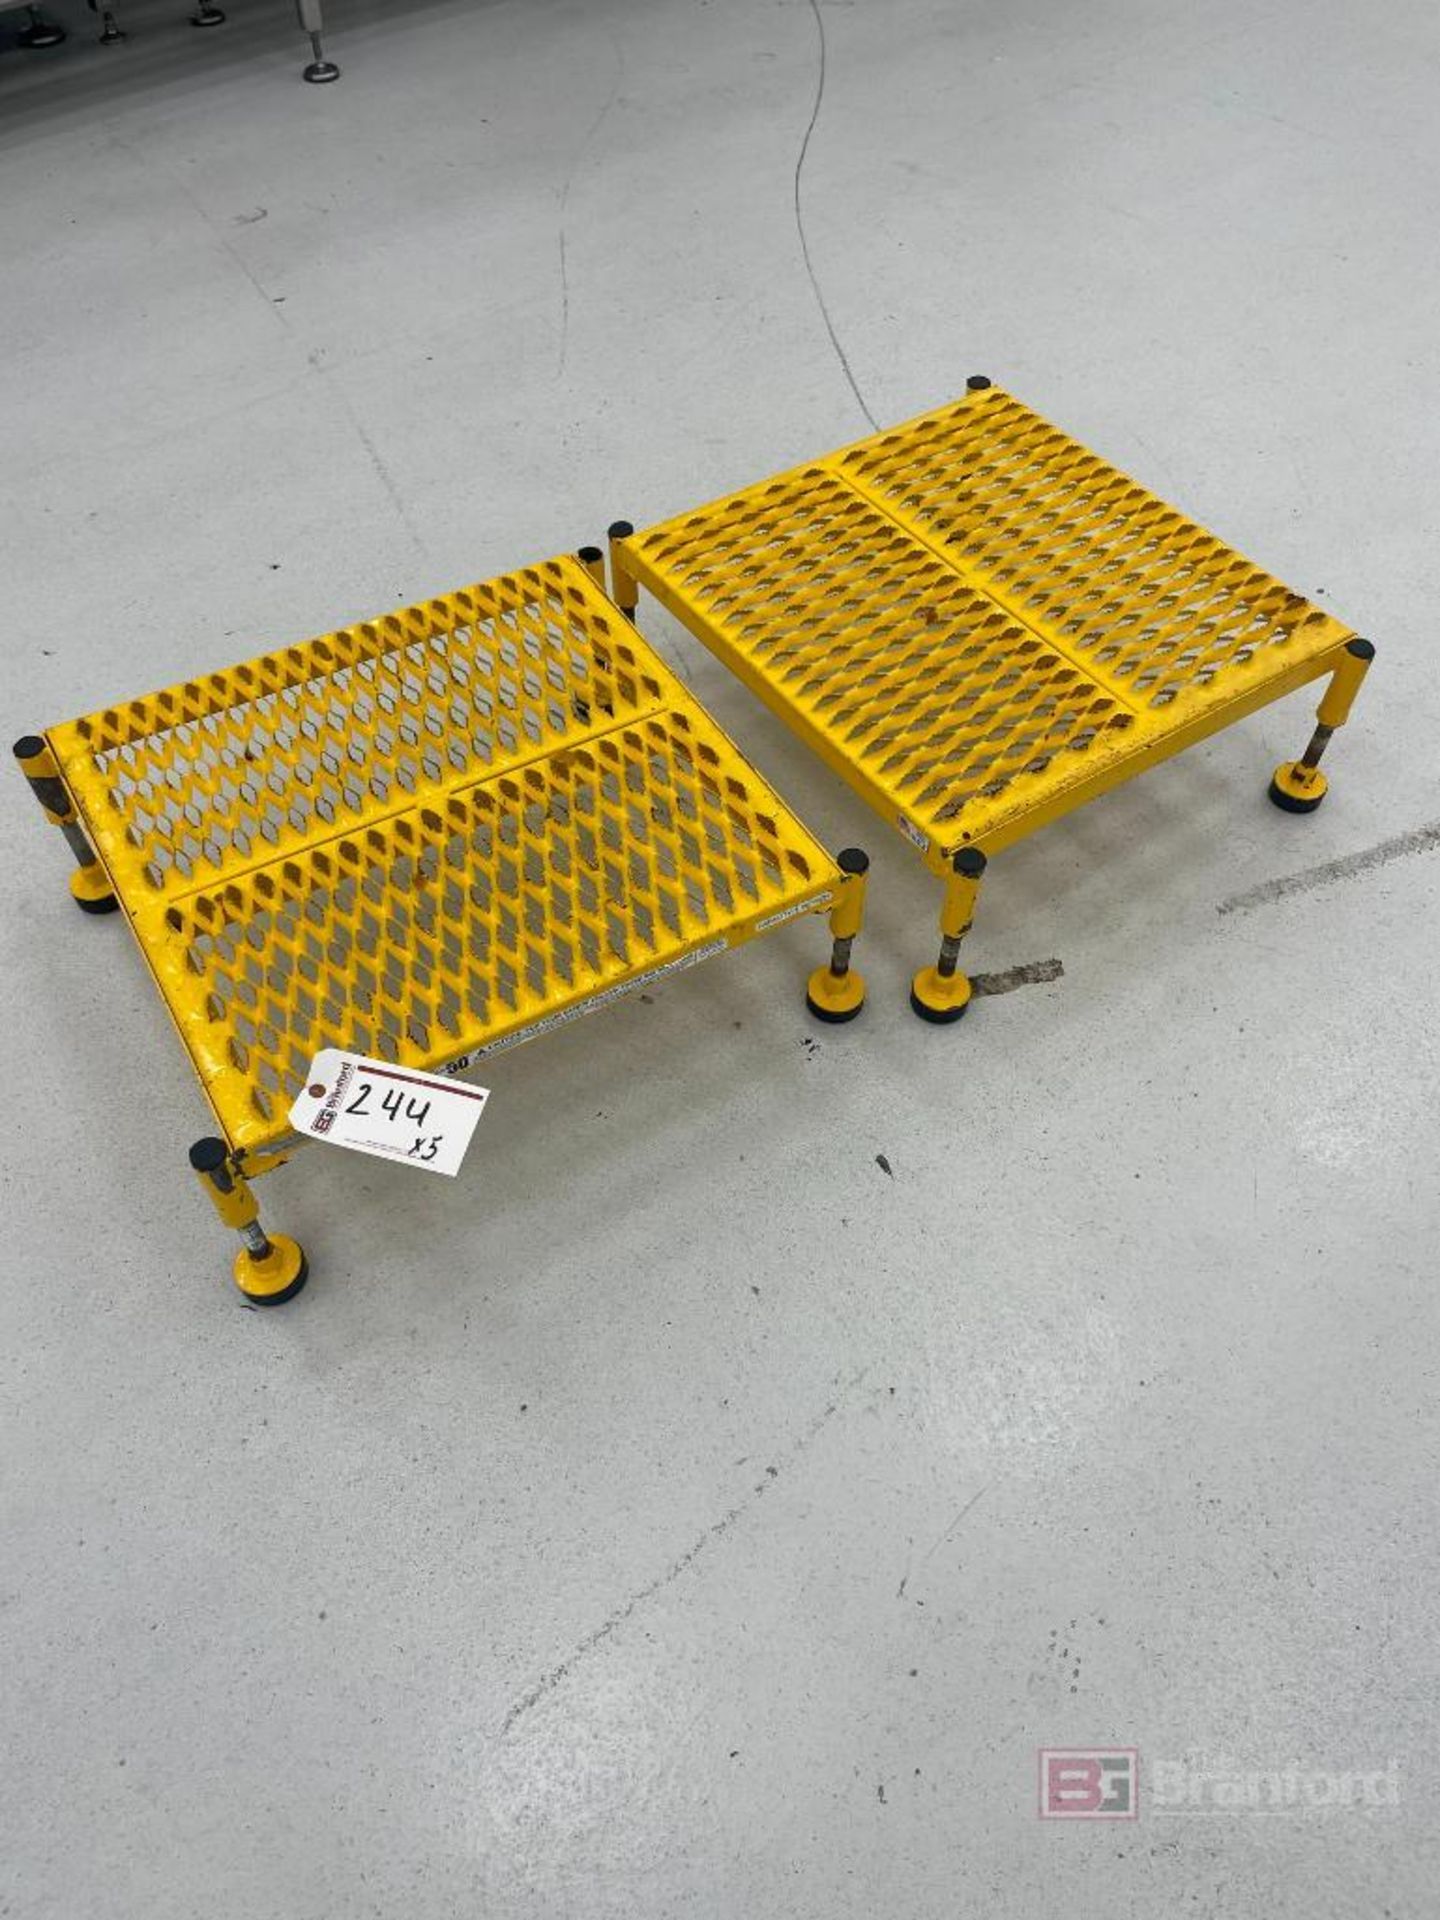 (5) Uline yellow step stools, grated